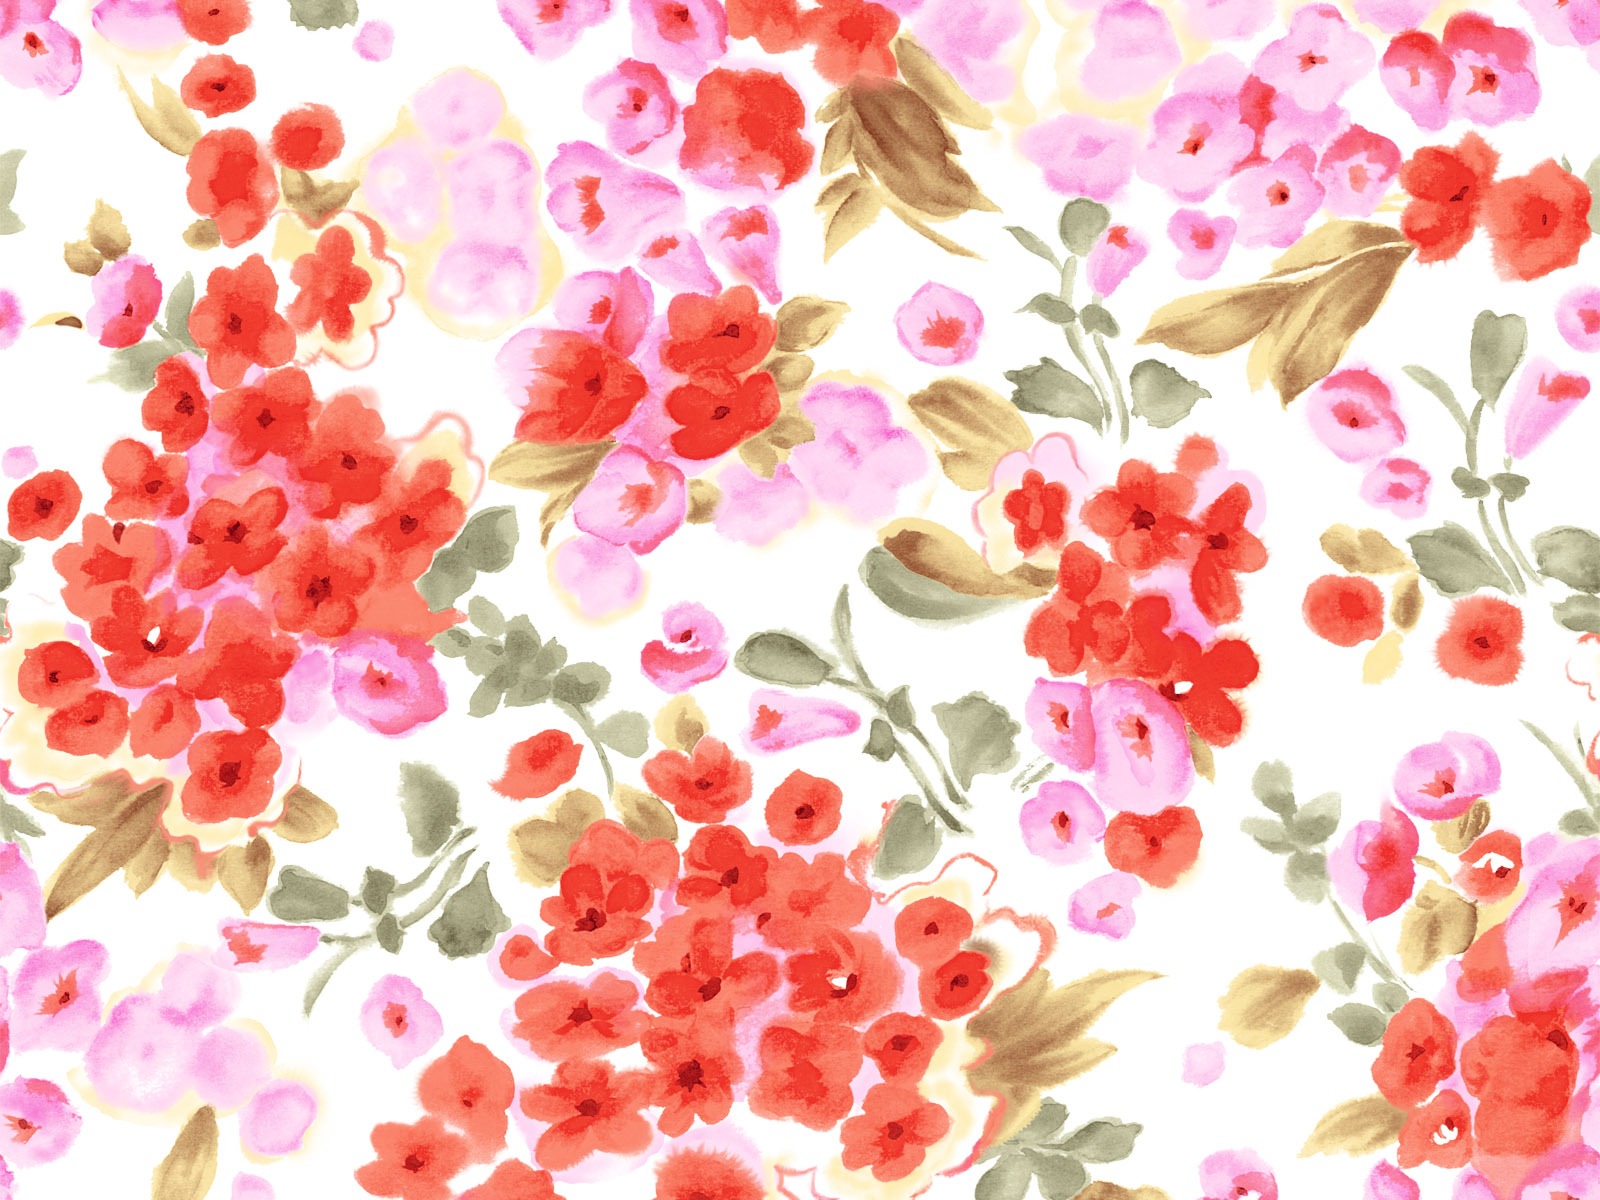 Synthetic Flower Wallpapers (2) #6 - 1600x1200